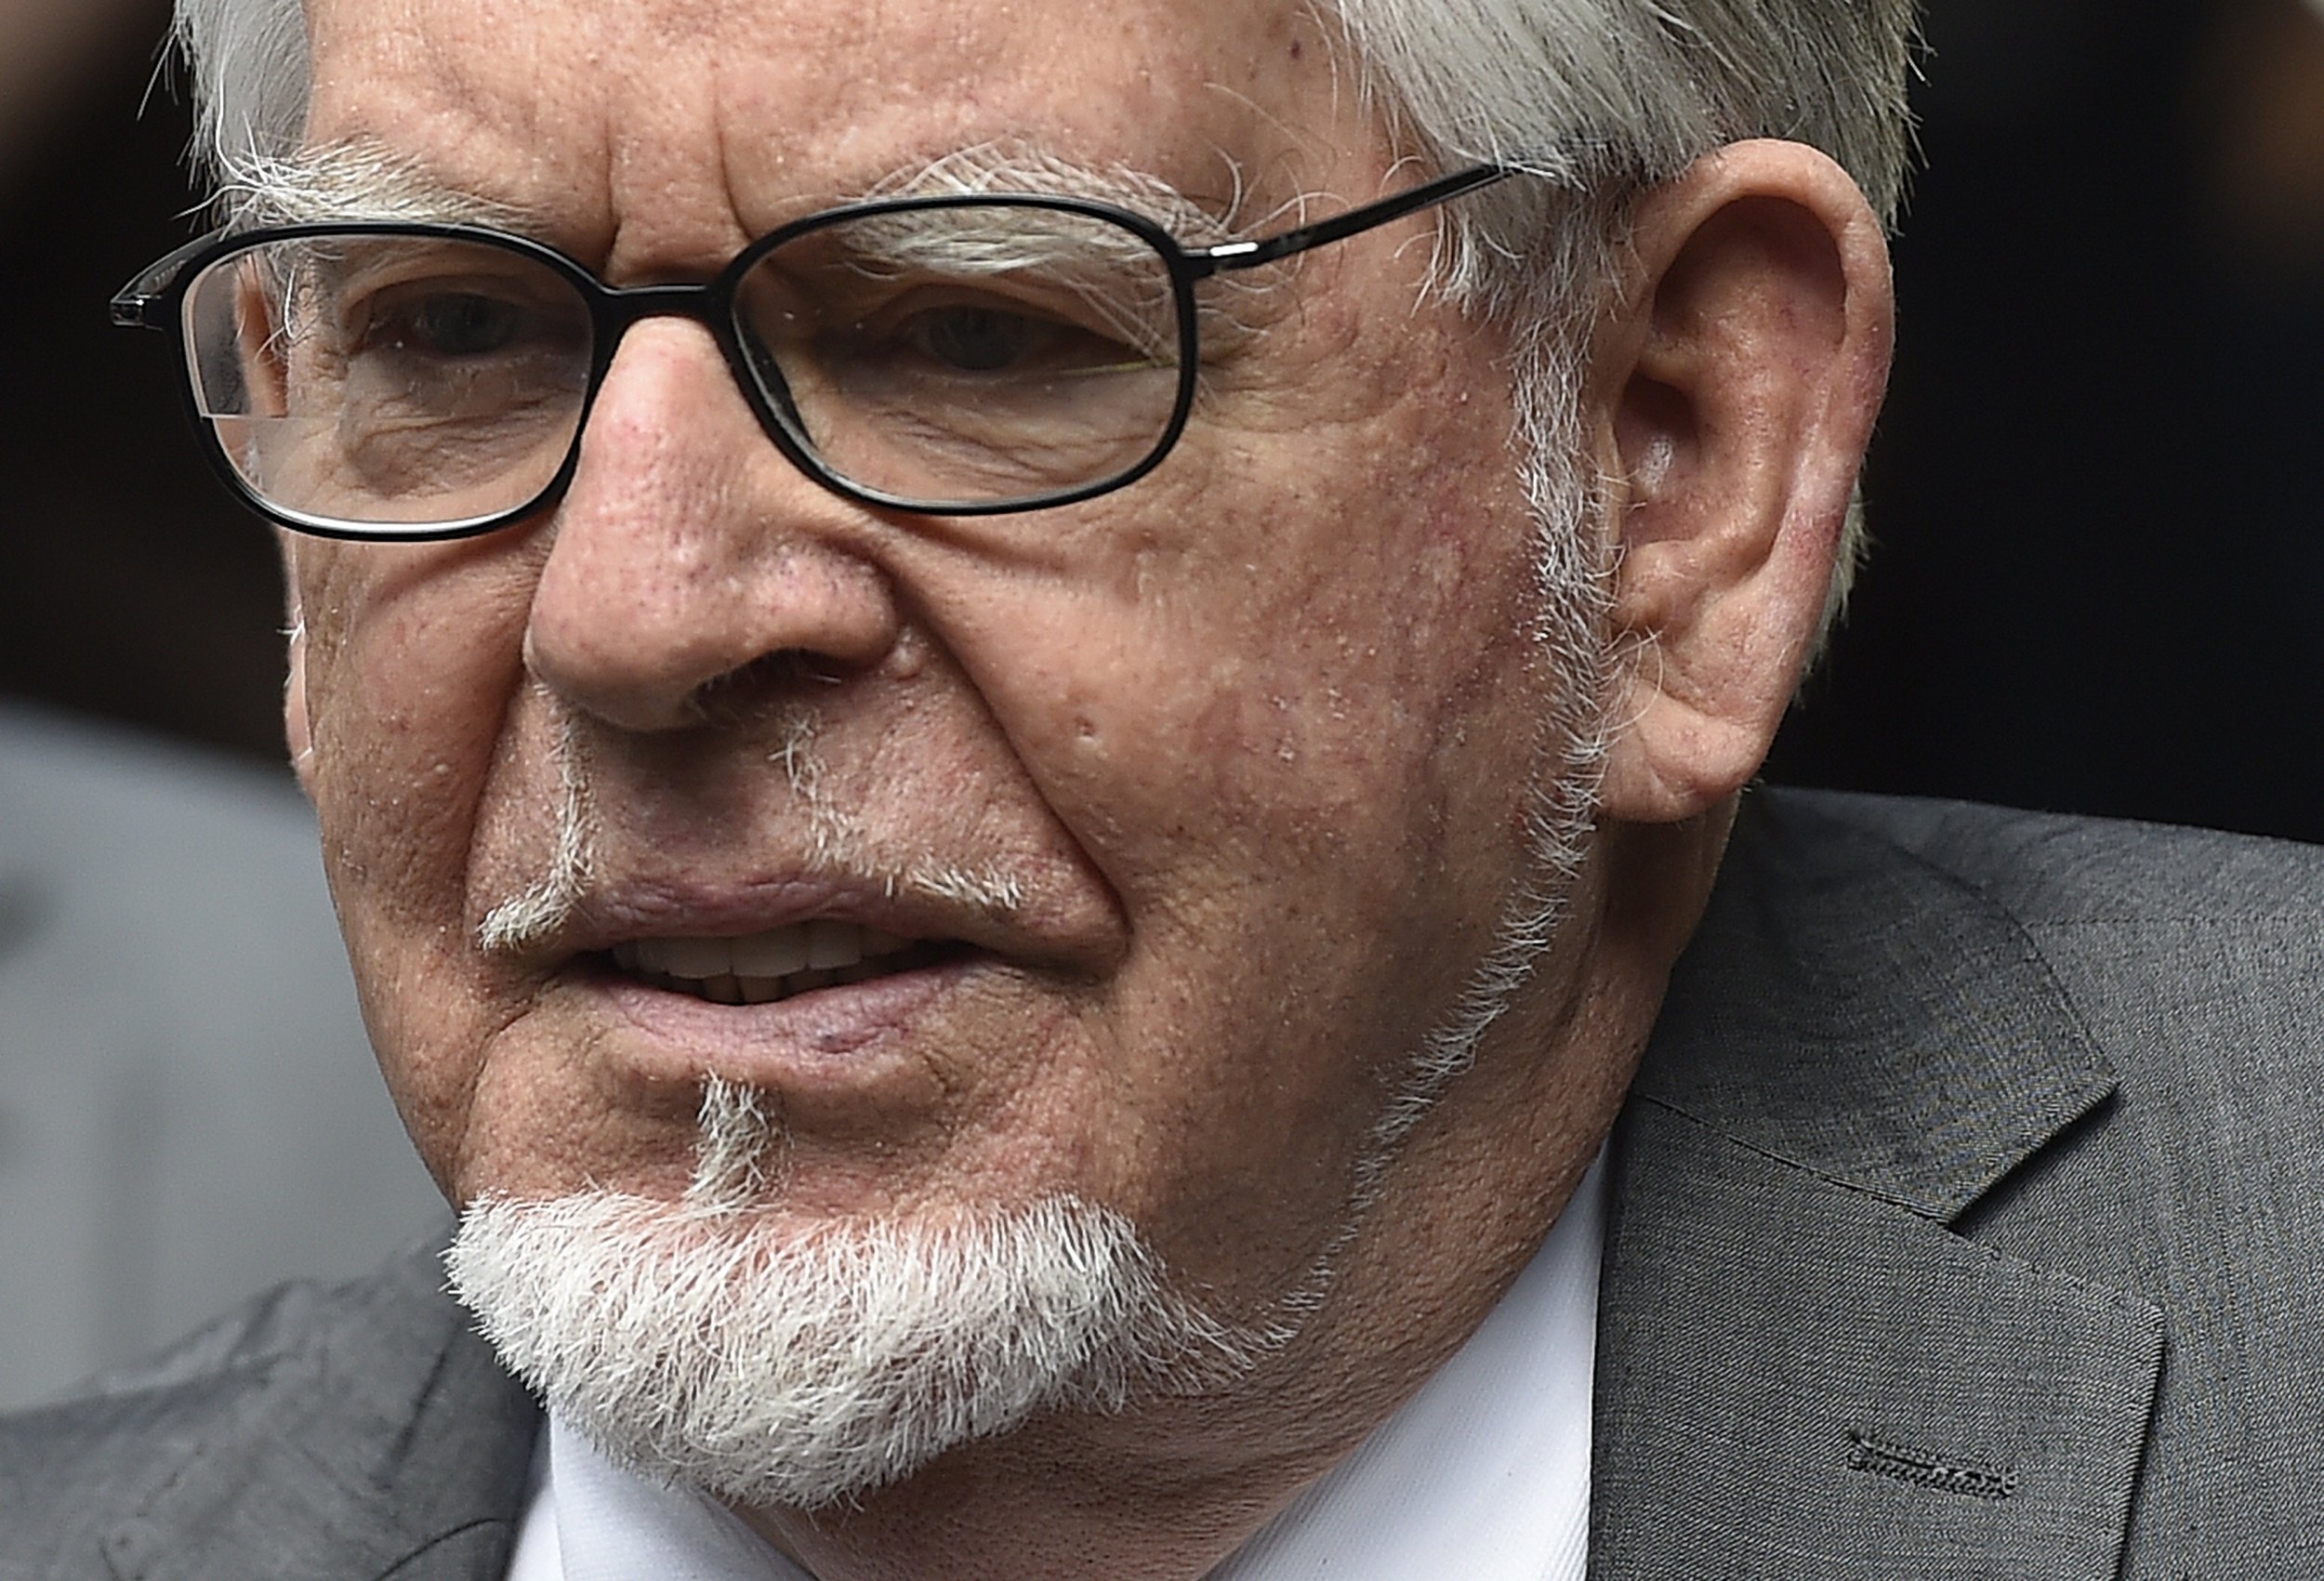 Rolf Harris faces further sex crime charges